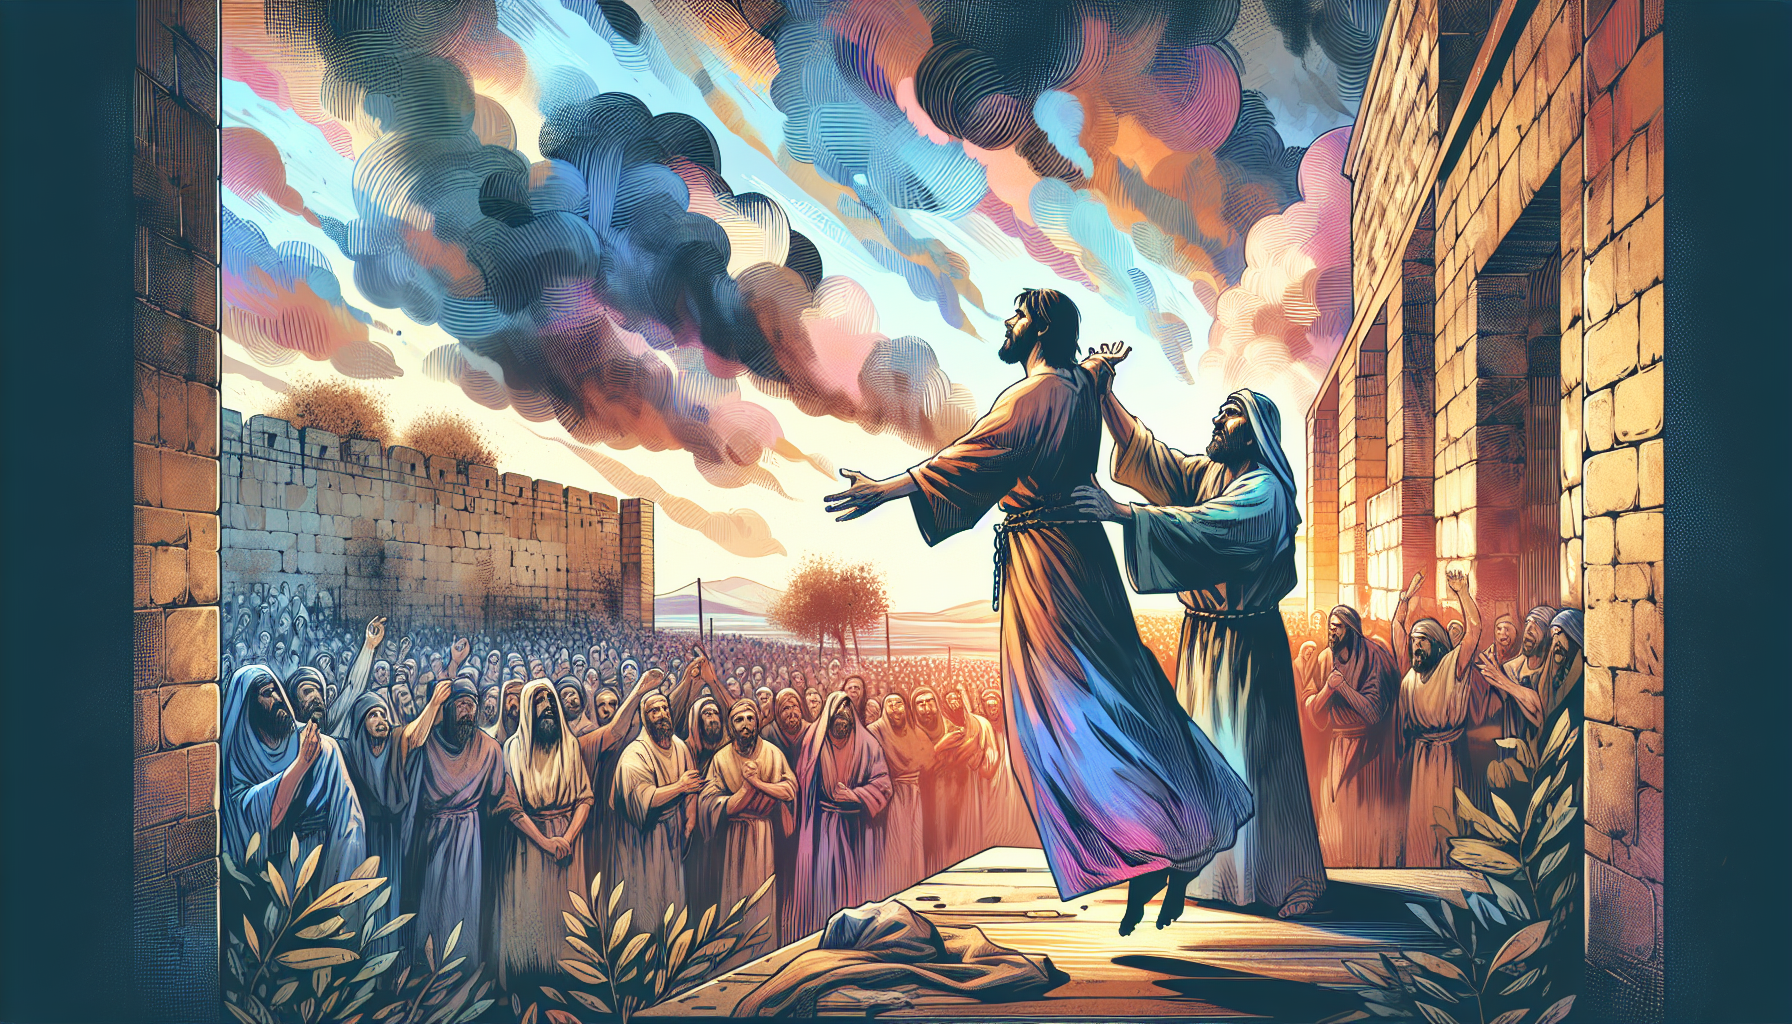 Artistic depiction of Barabbas being freed instead of Jesus, with a somber crowd in ancient Jerusalem, under a dramatic sky.